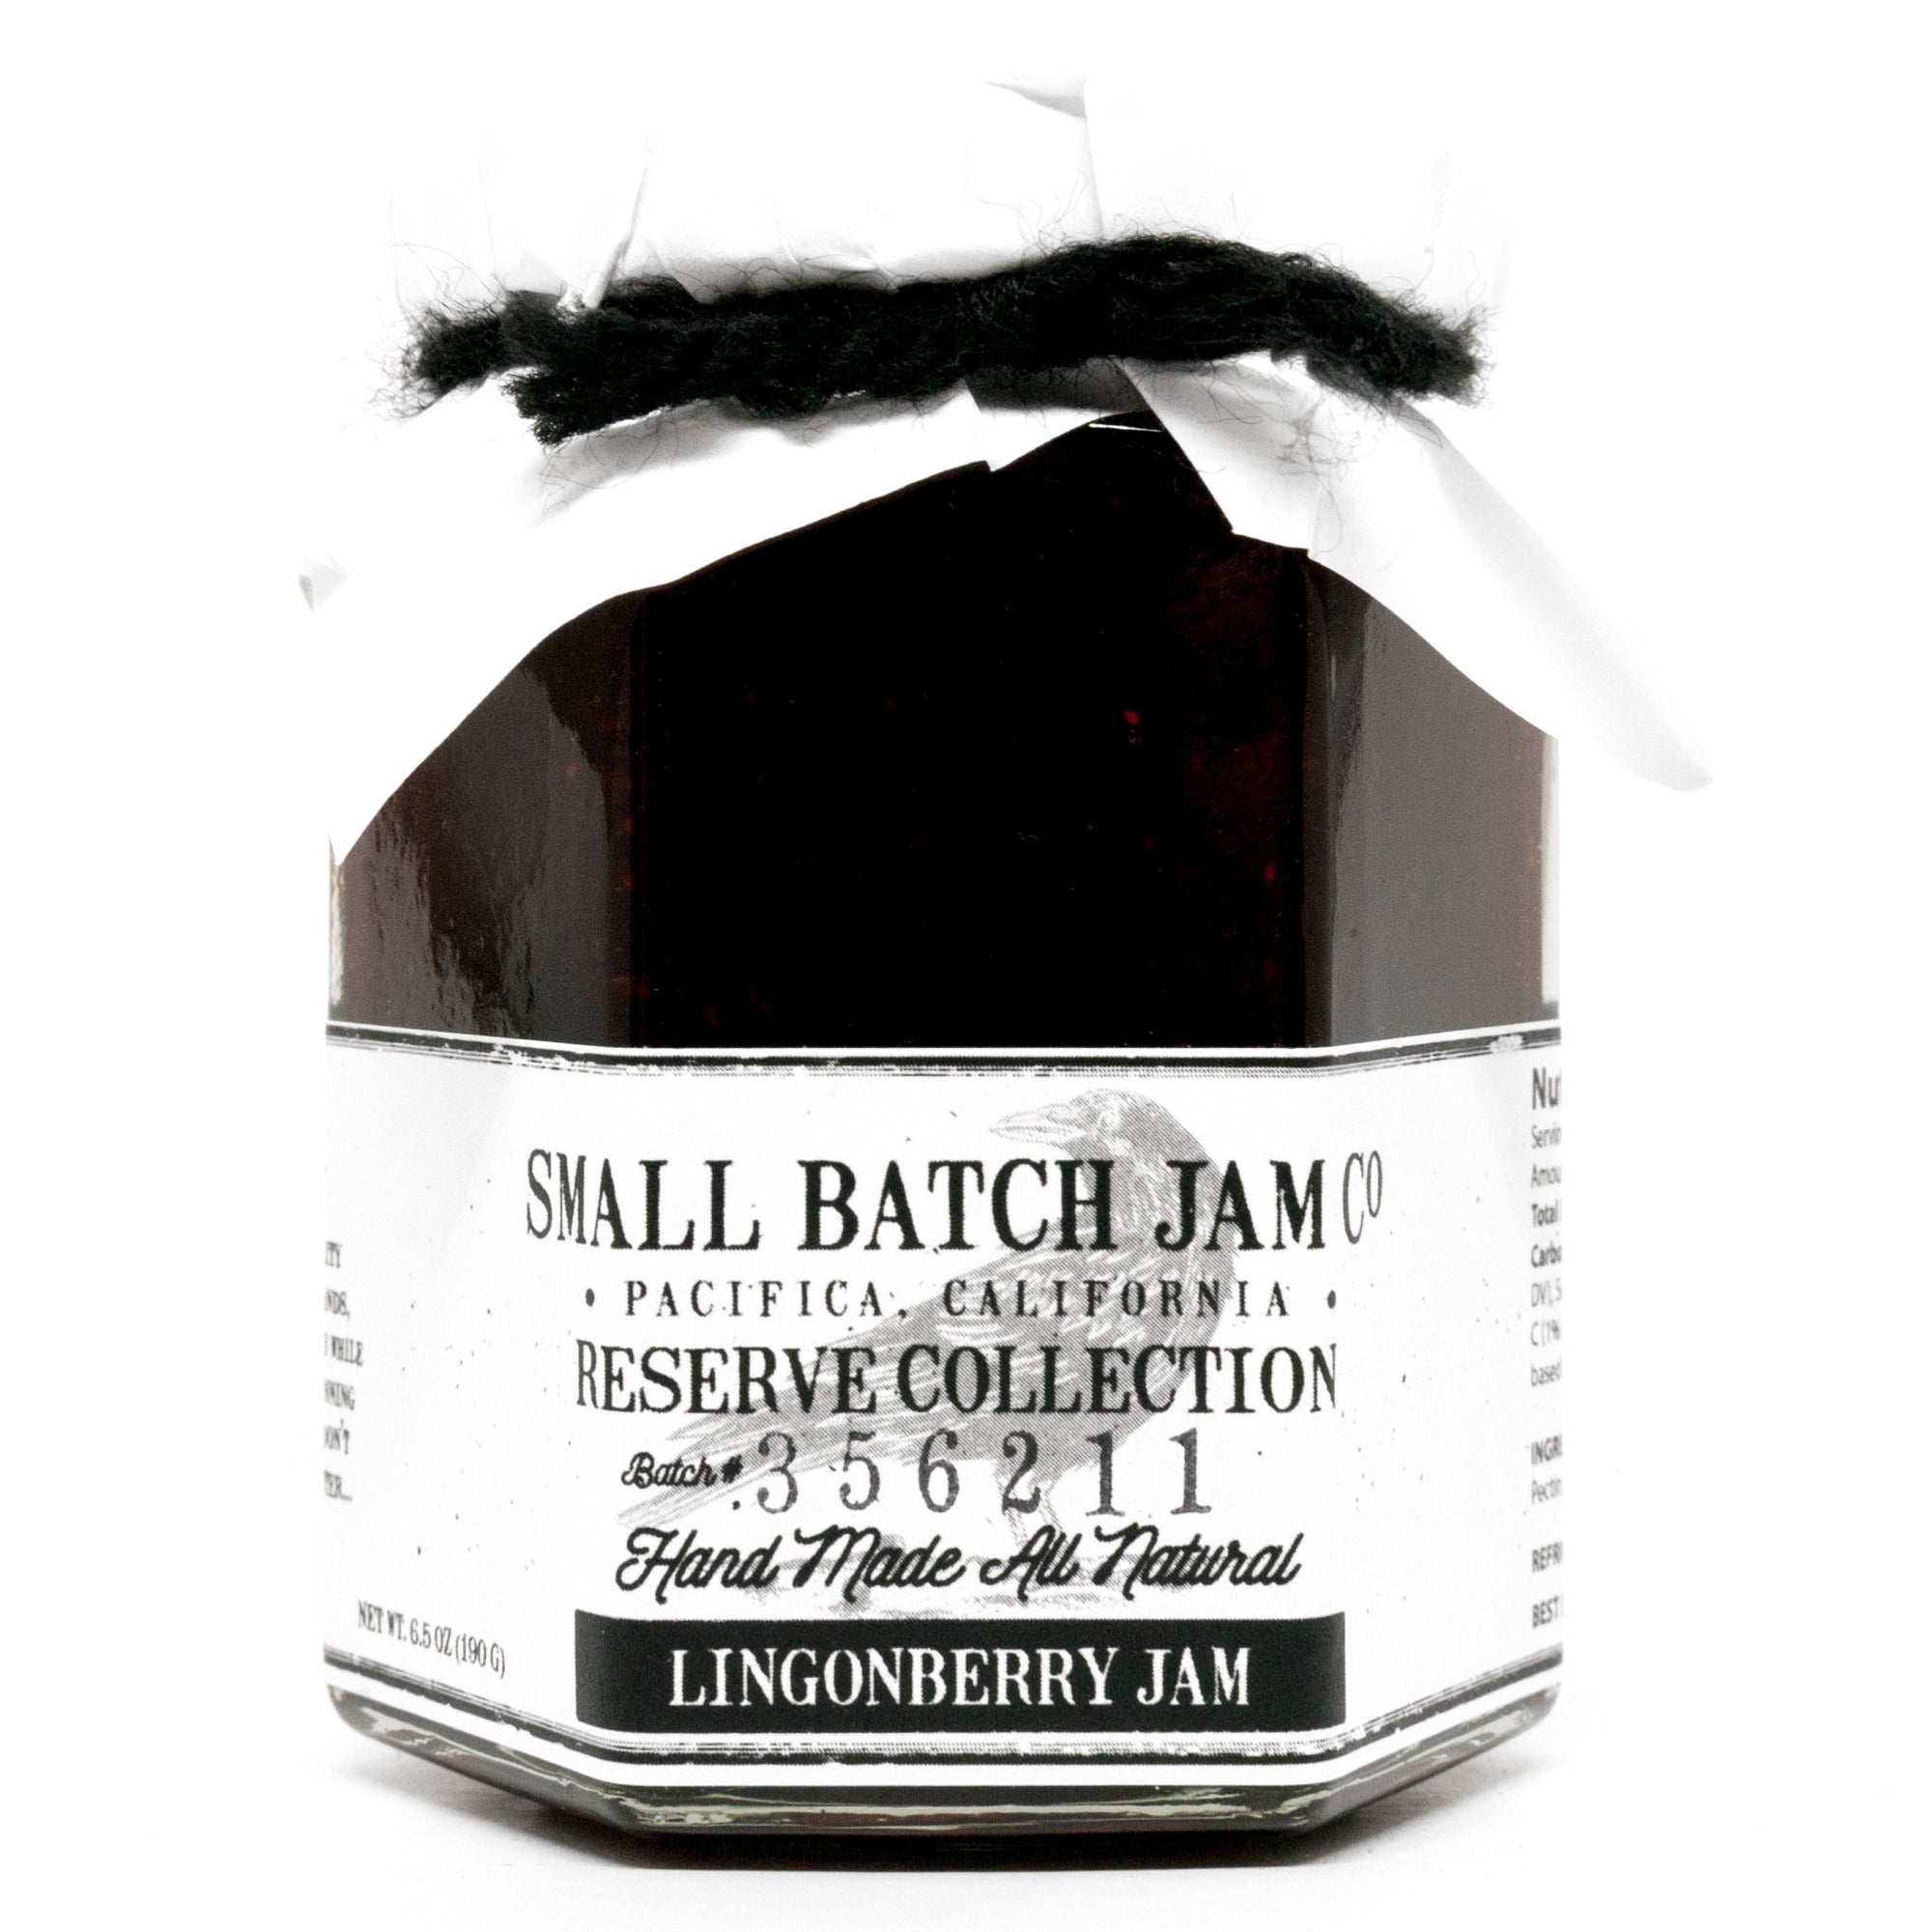 Lingonberry Jam - Reserve Collection - Small Batch Jam Co